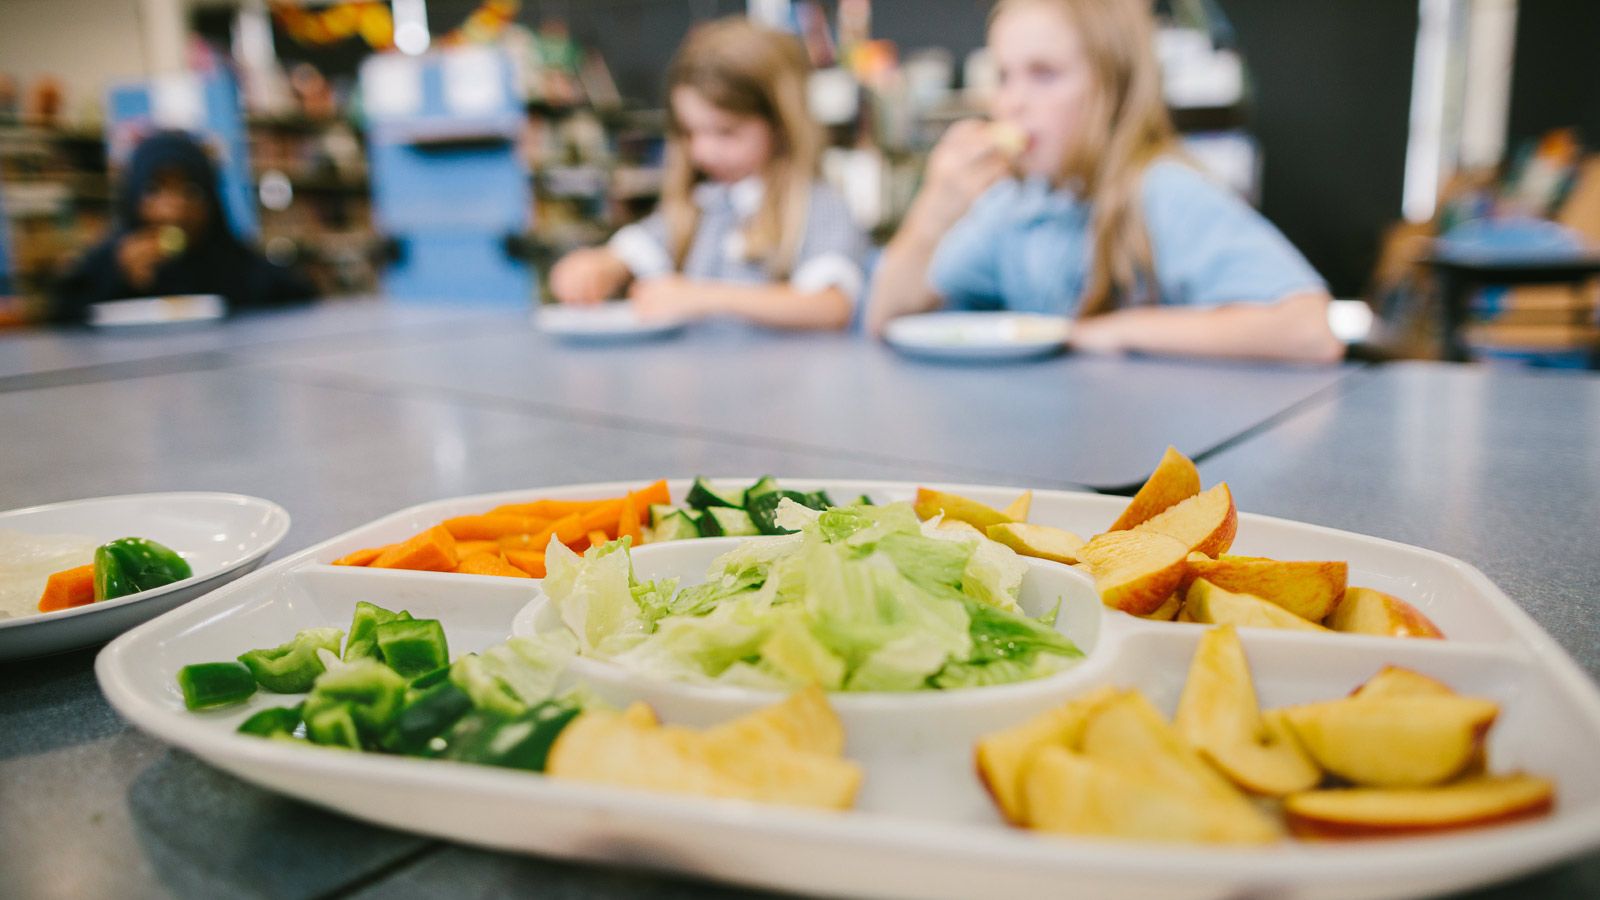 Healthy Eating for Children: 6 Ways to Build Healthy Habits for Children During COVID-19